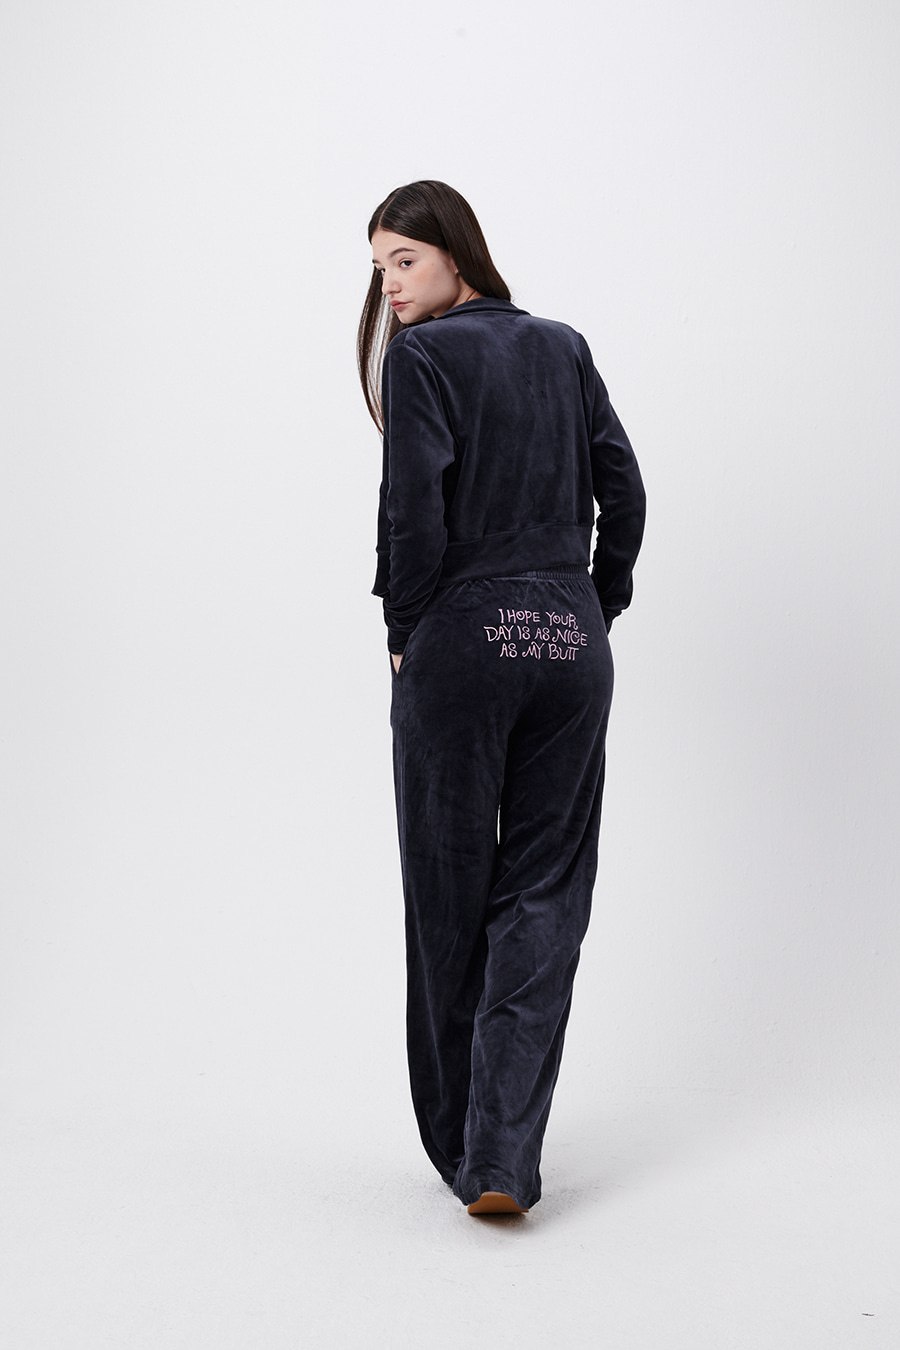 &#039;I hope your days is as nice as my butt&#039; Velour track suit pants - Charcoal